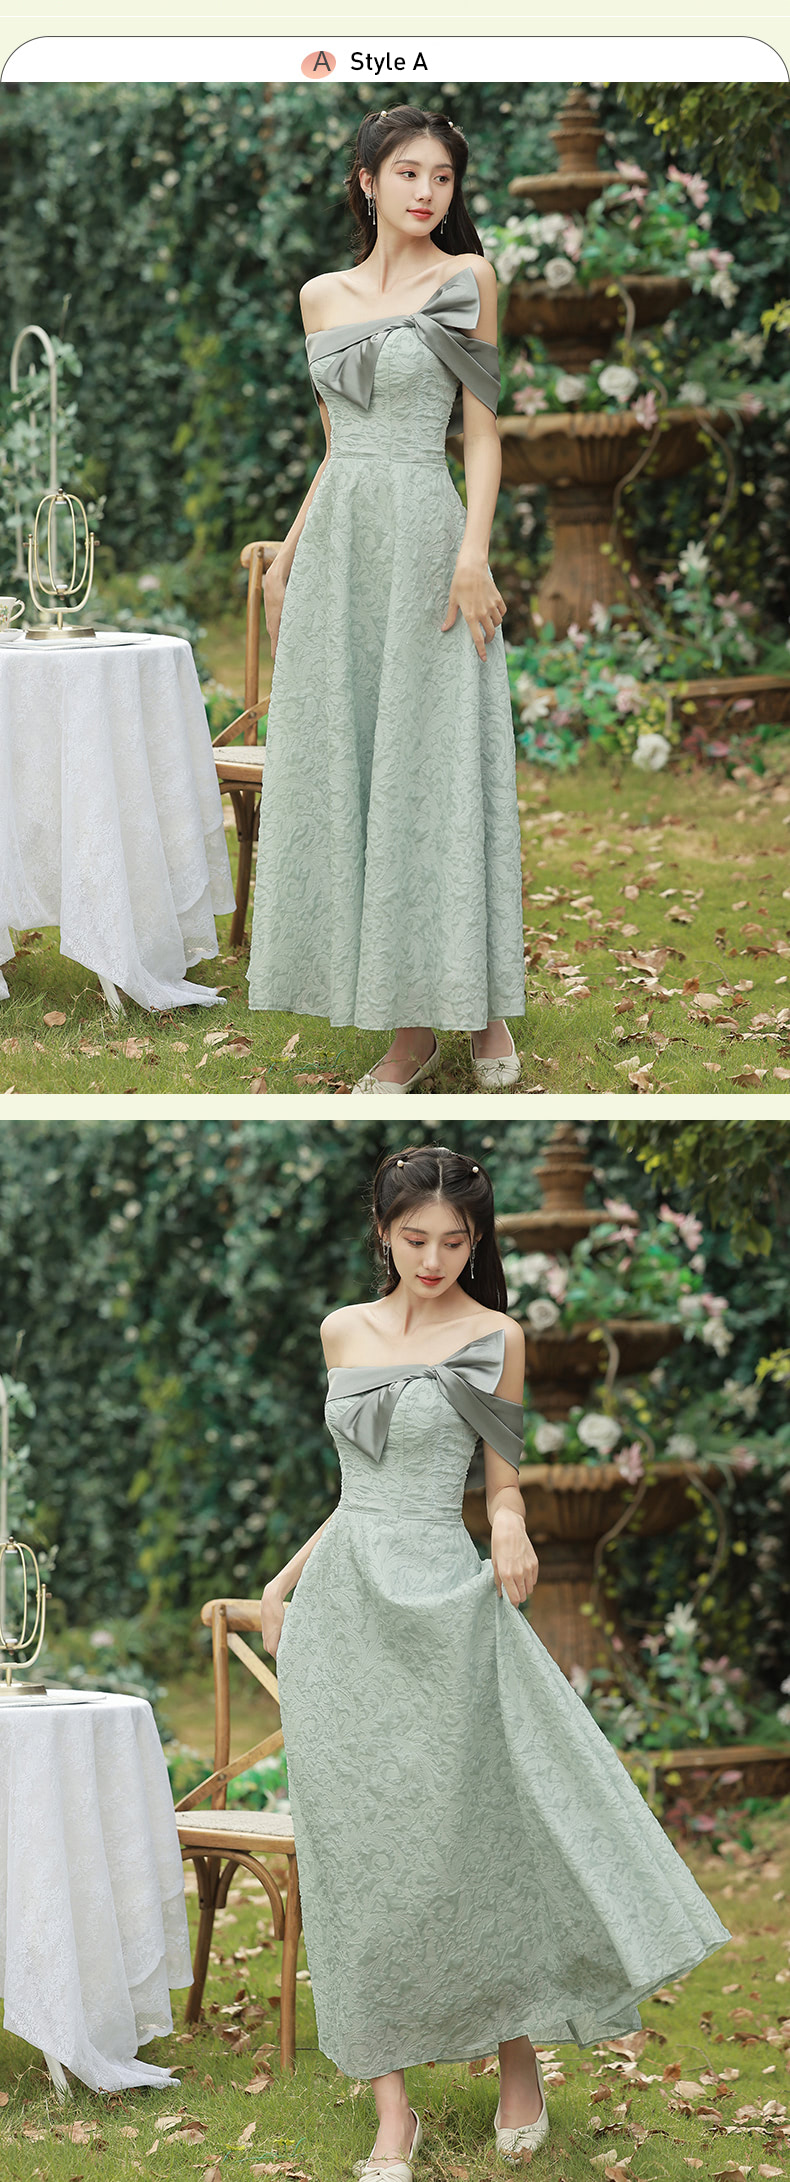 A-Line-Green-Bridesmaid-Maxi-Dress-Maid-of-Honor-Party-Formal-Gown18.jpg